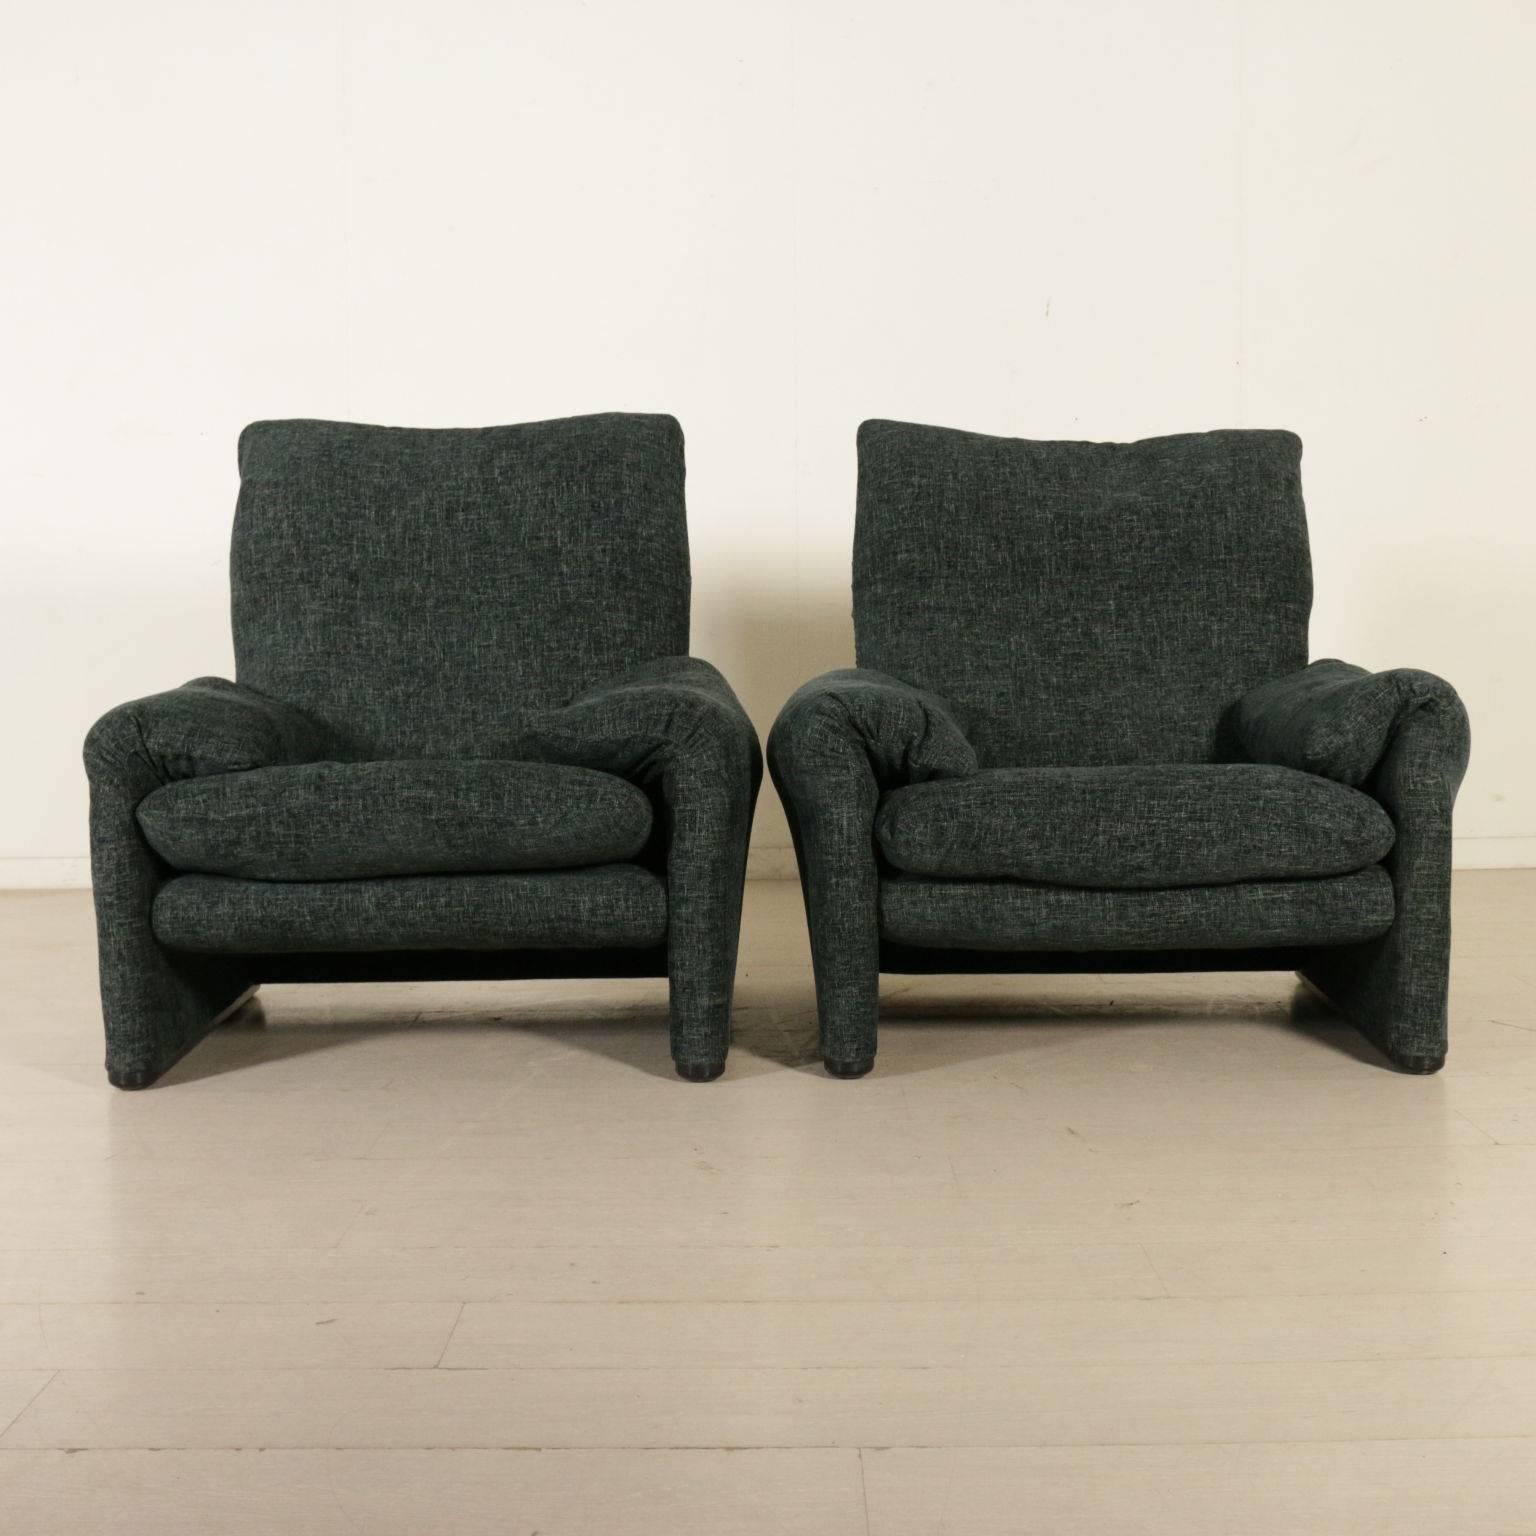 Mid-Century Modern Pair of Armchairs Maralunga Designed for Cassina Vintage, Italy, 1970s-1980s